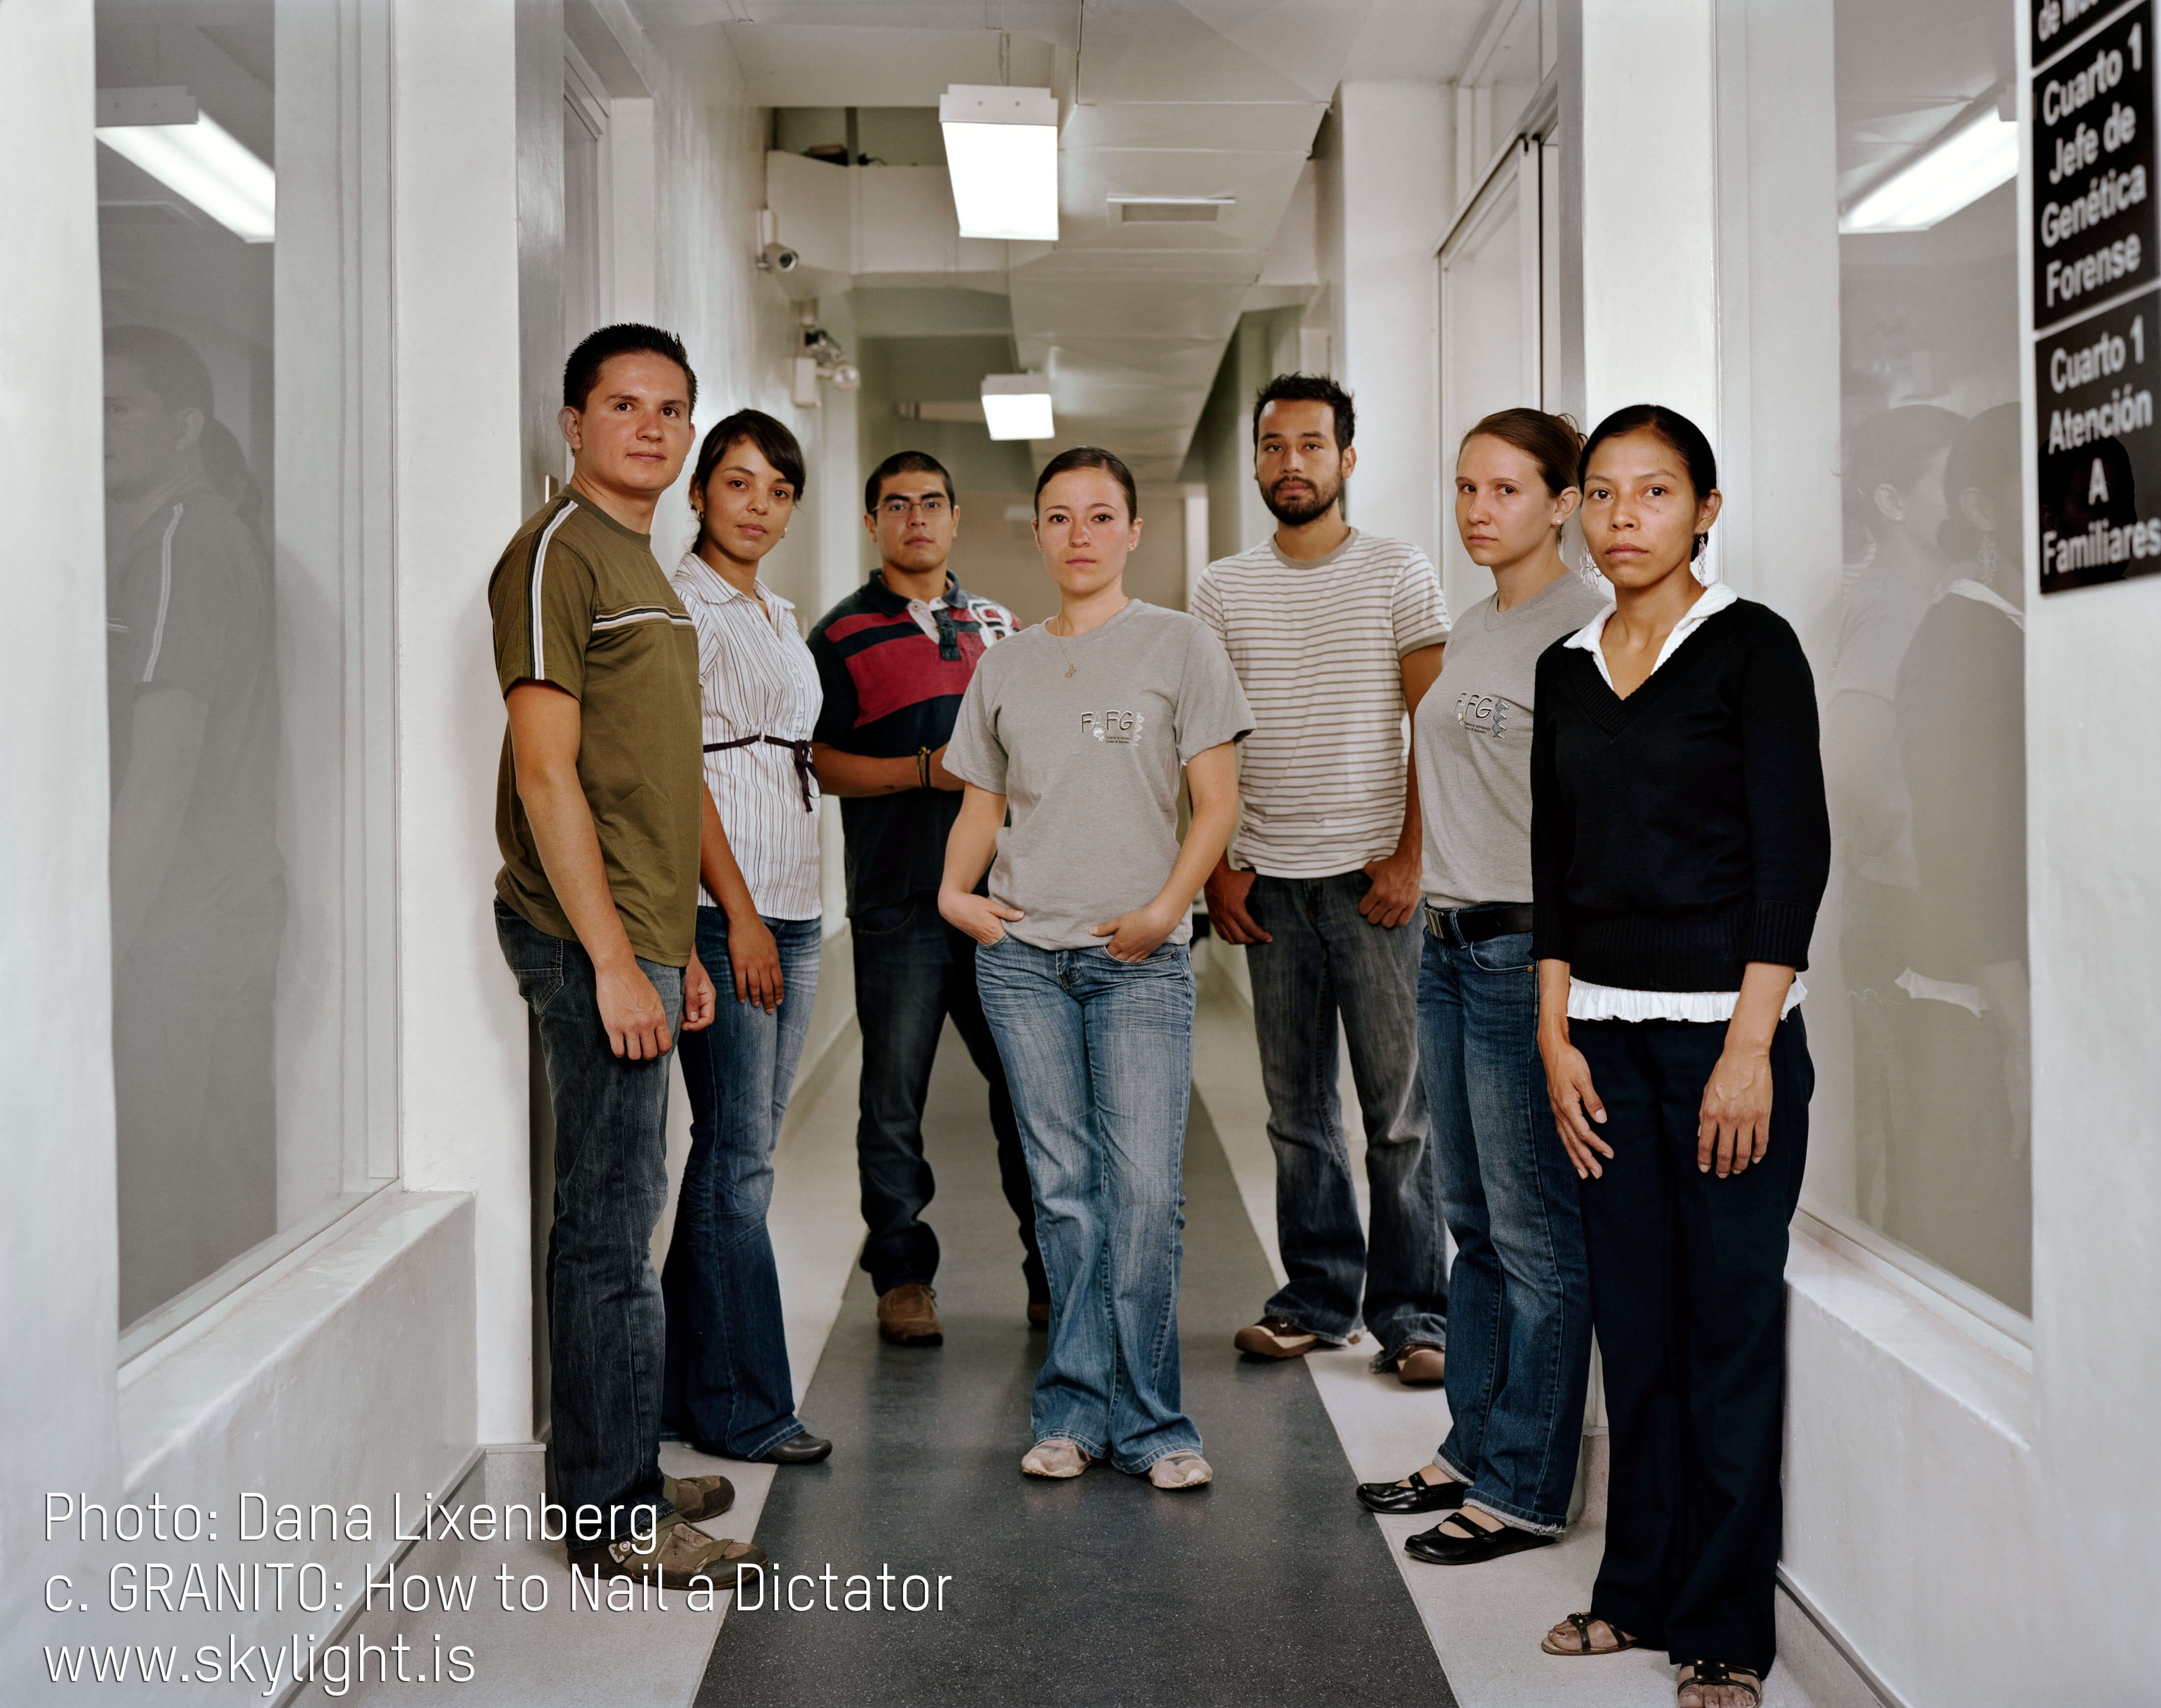 Still from Granito. Group photo of 7 men and women staring straight ahead, unsmiling. The photo is taken in a white hallway, with overhead fluorescenet lights and airducts. An sign on the wall reads: "Cuarto Jefe de Genética Forense" (translation in English: Room of Head of Genetic Forensics). Photo credit is listed on the bottom left of the image.